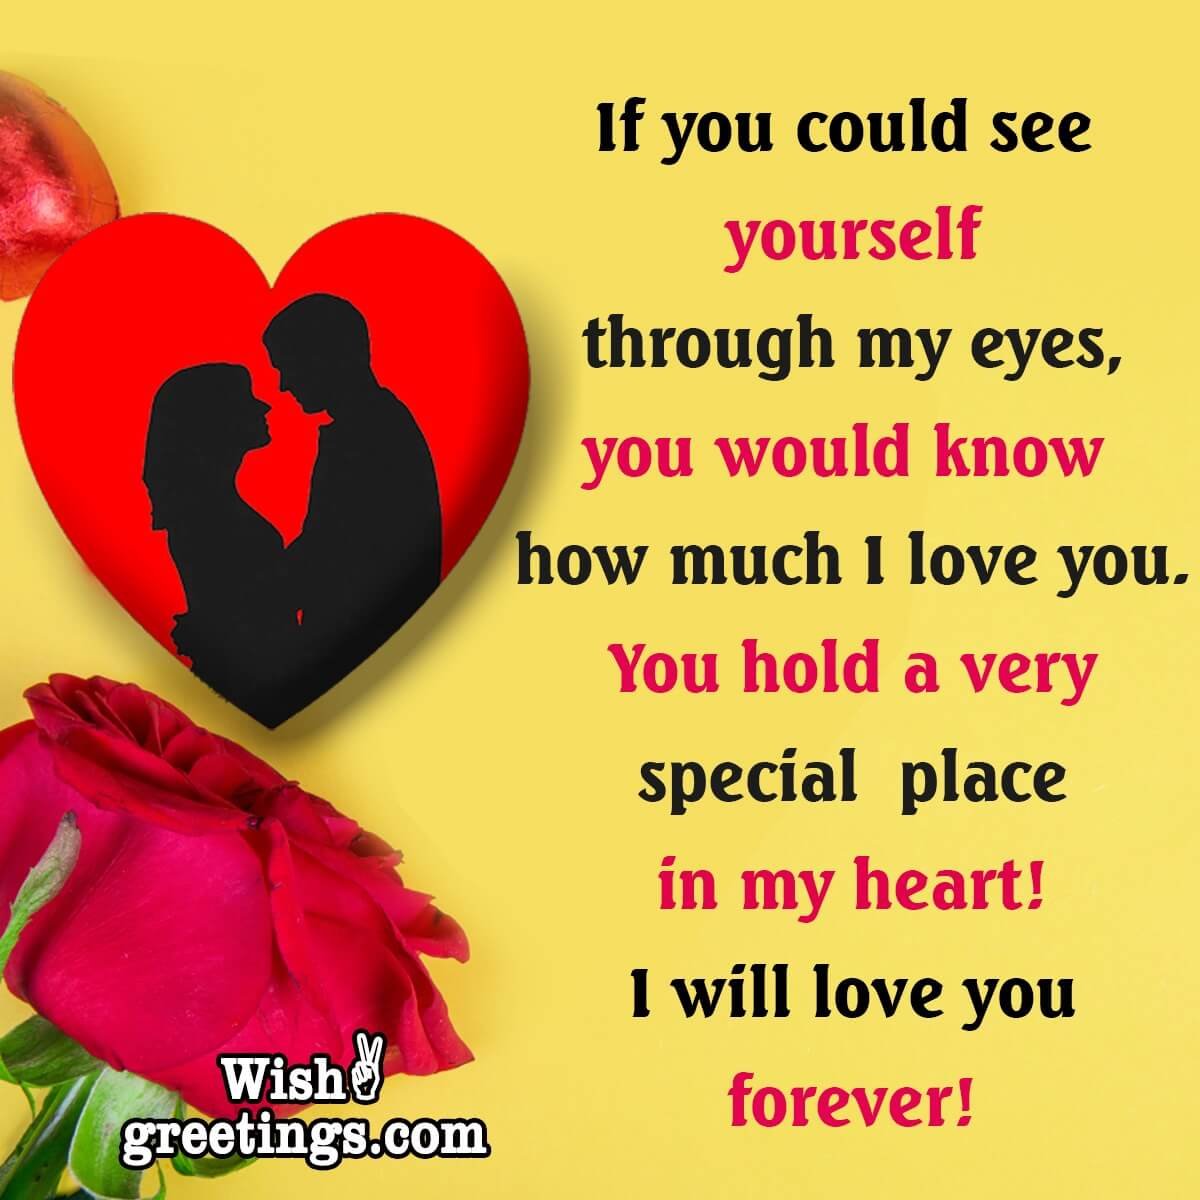 Heart Touching Love Messages - Wish Greetings